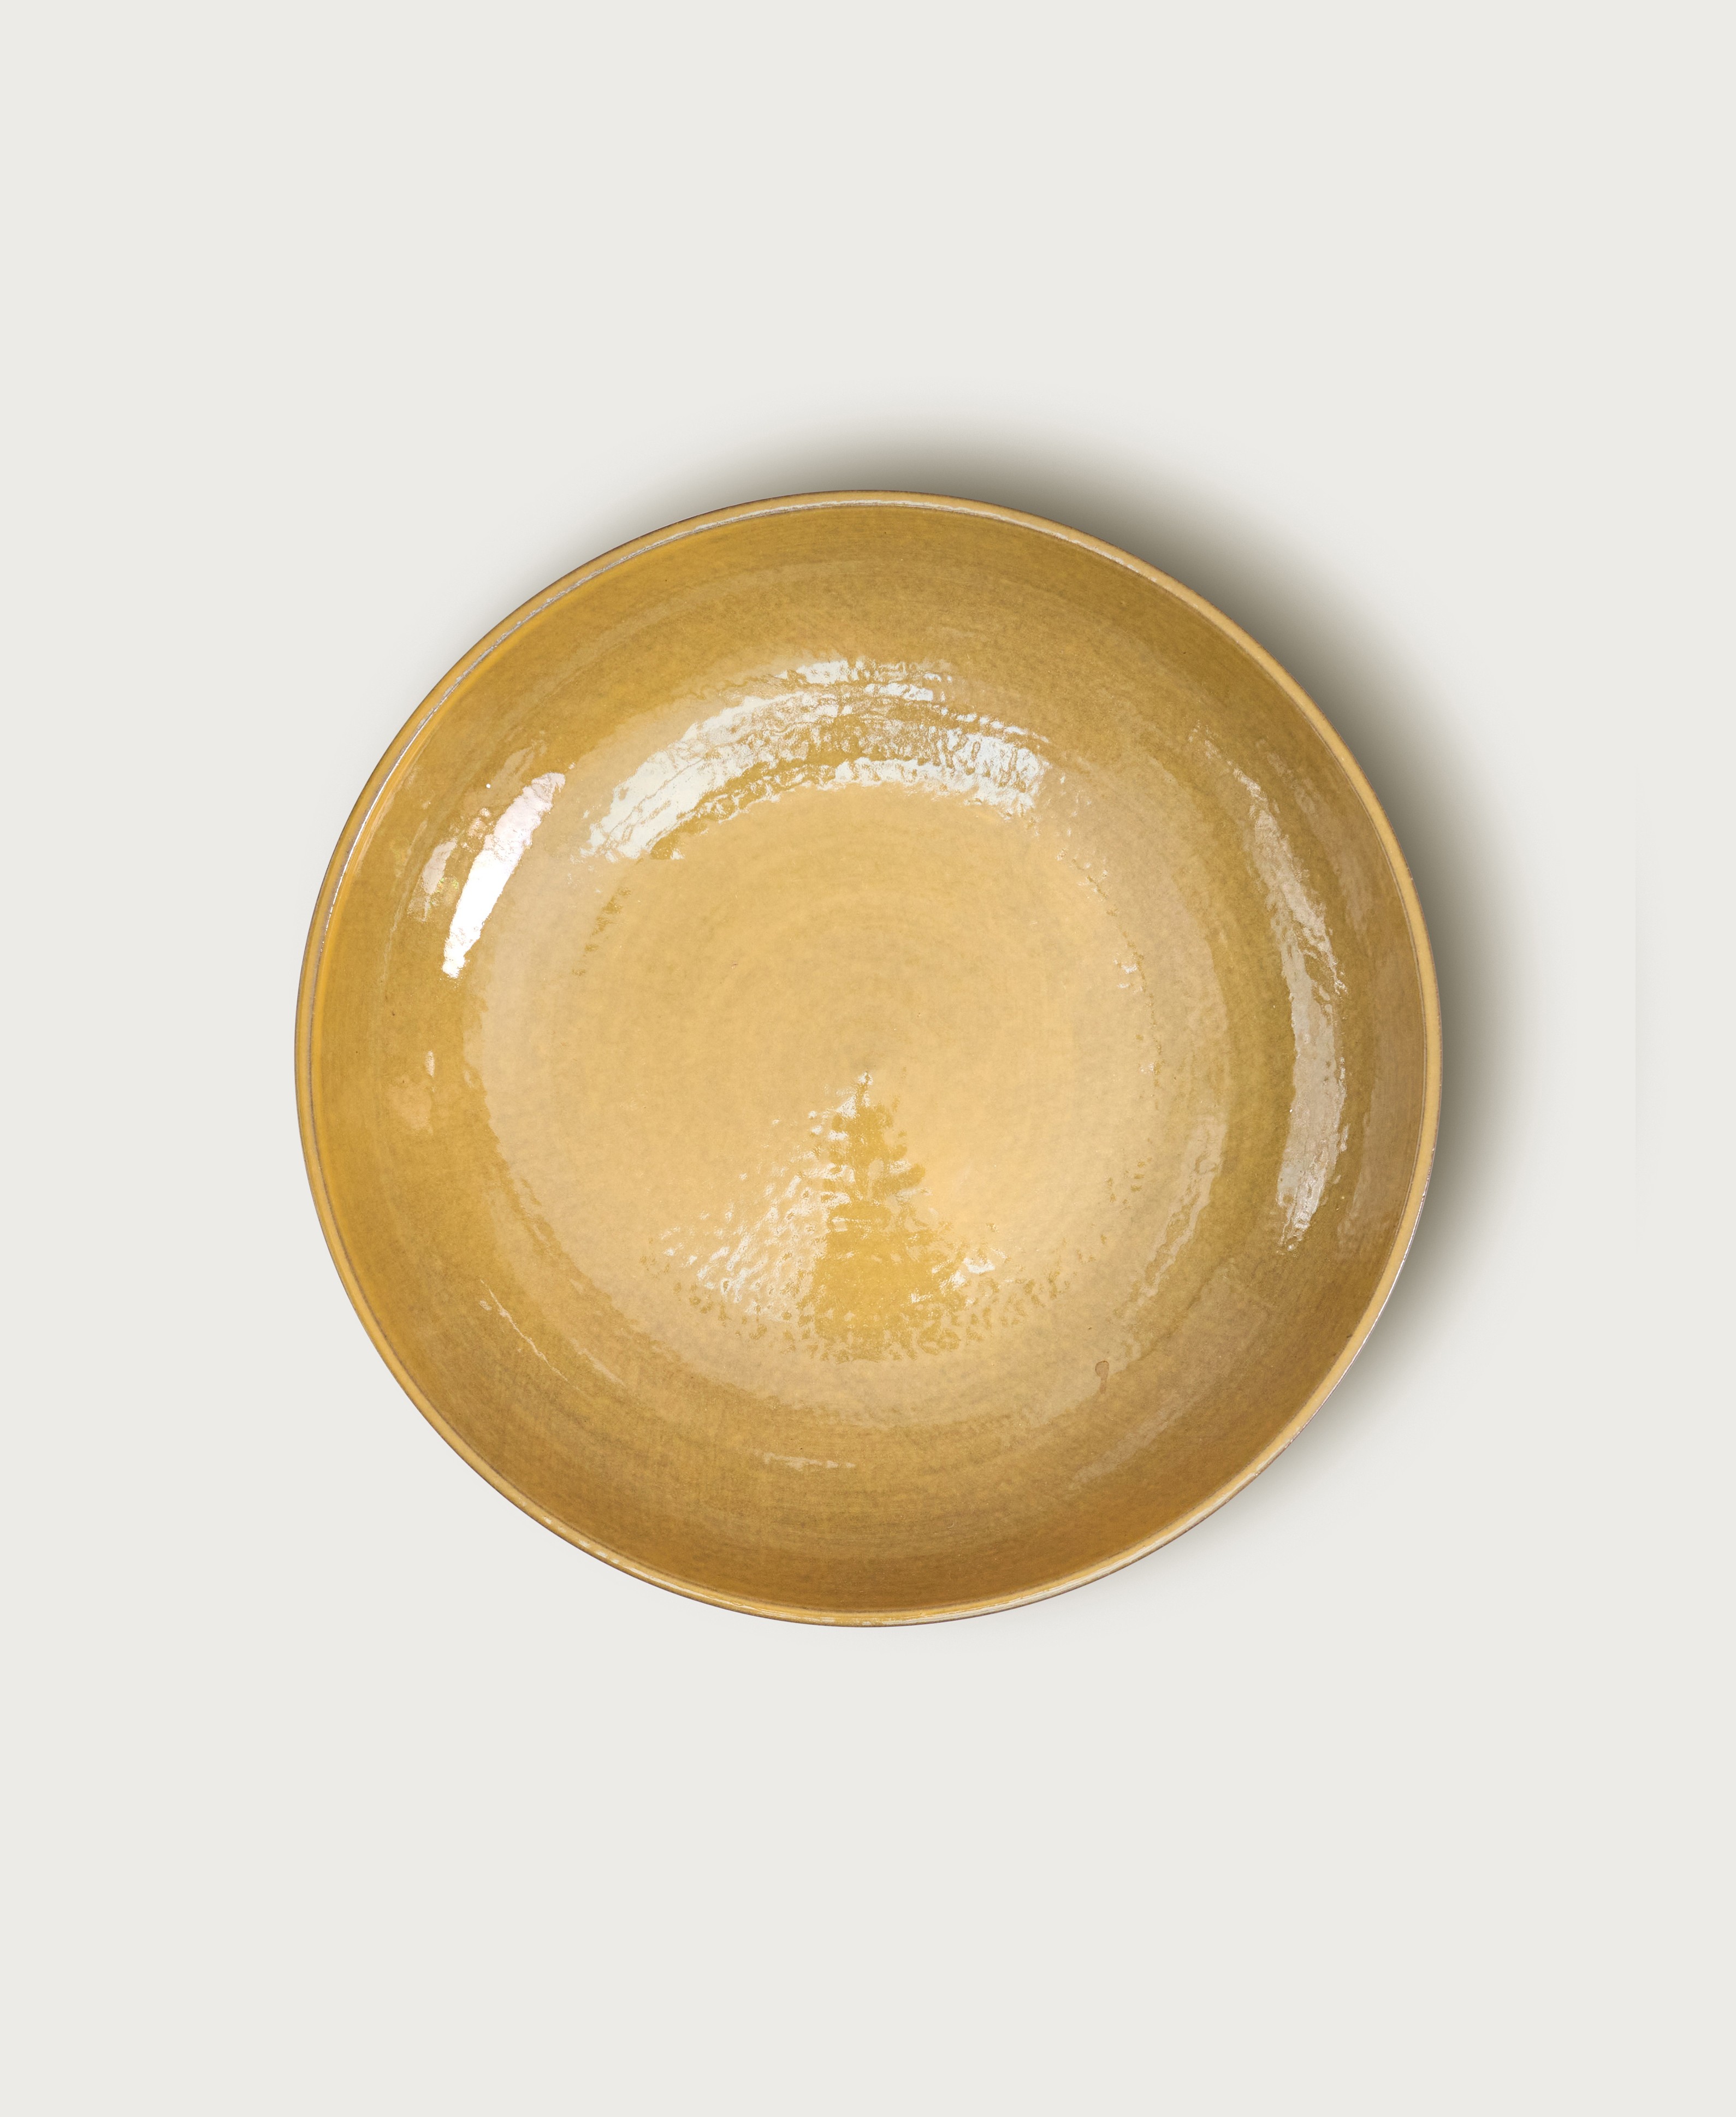 a small yellow bowl on a white surface